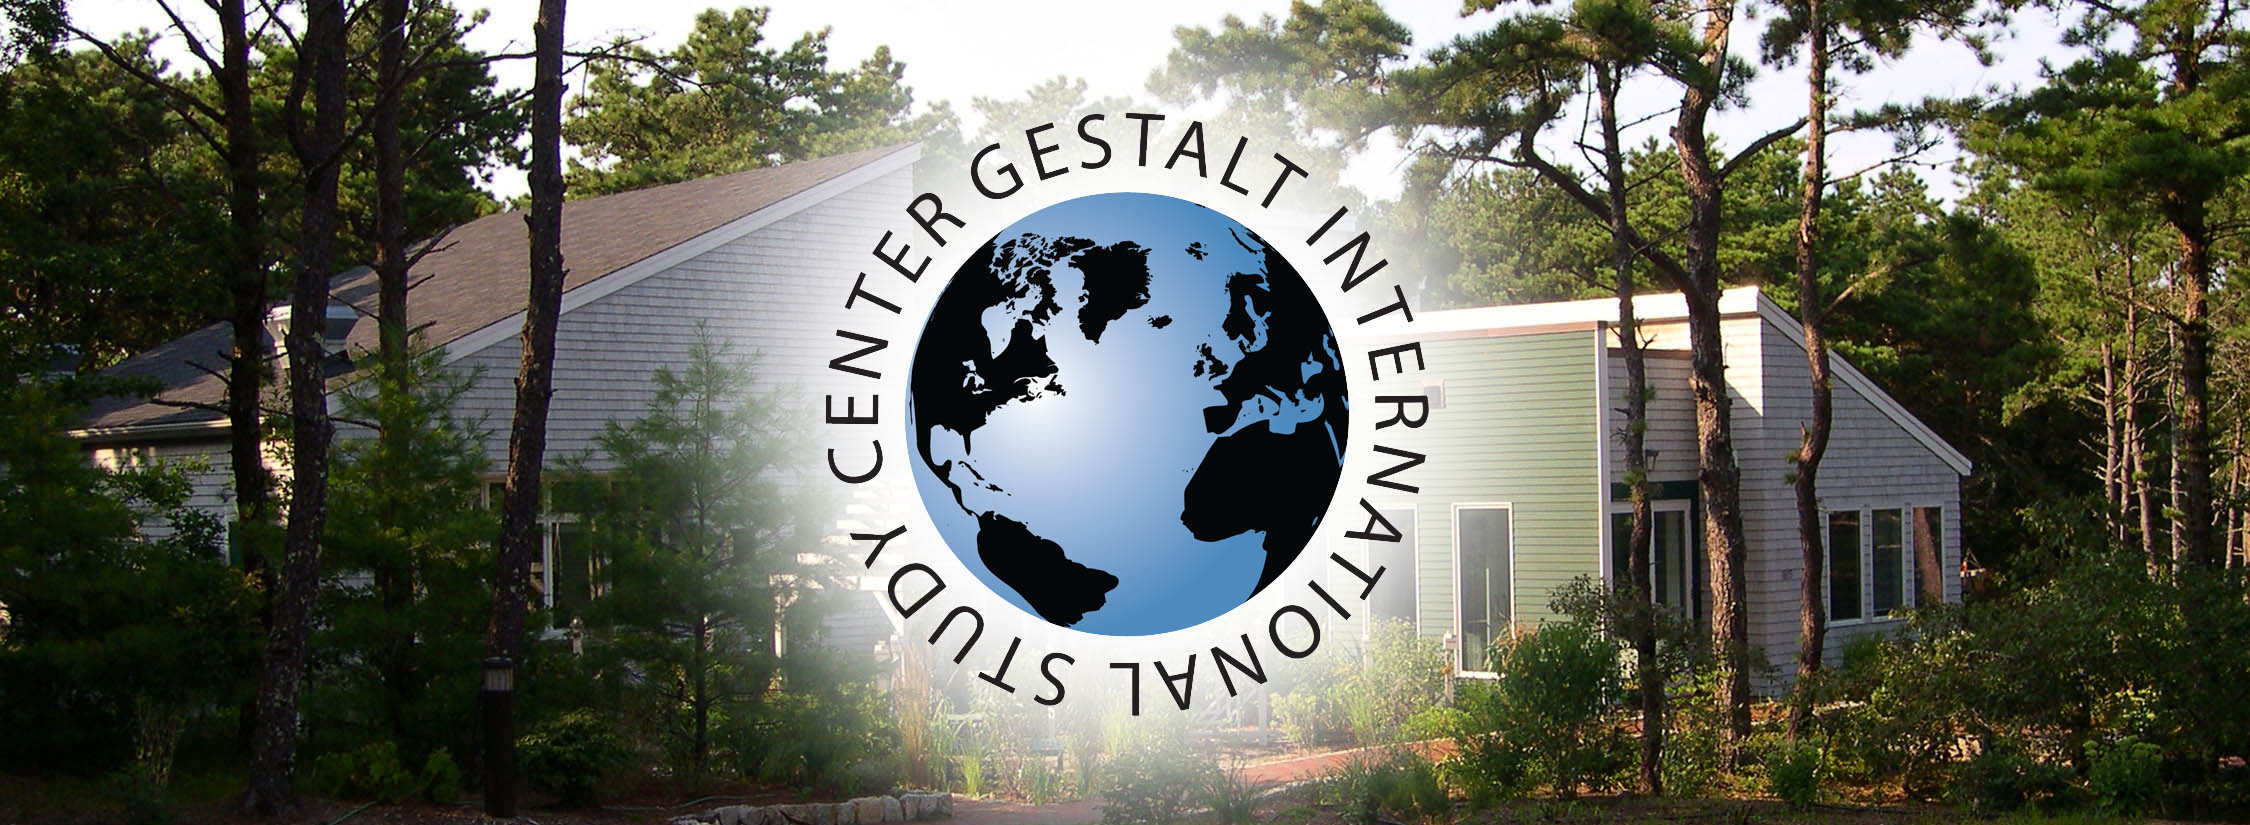 Subscribe to the Gestalt Review today!